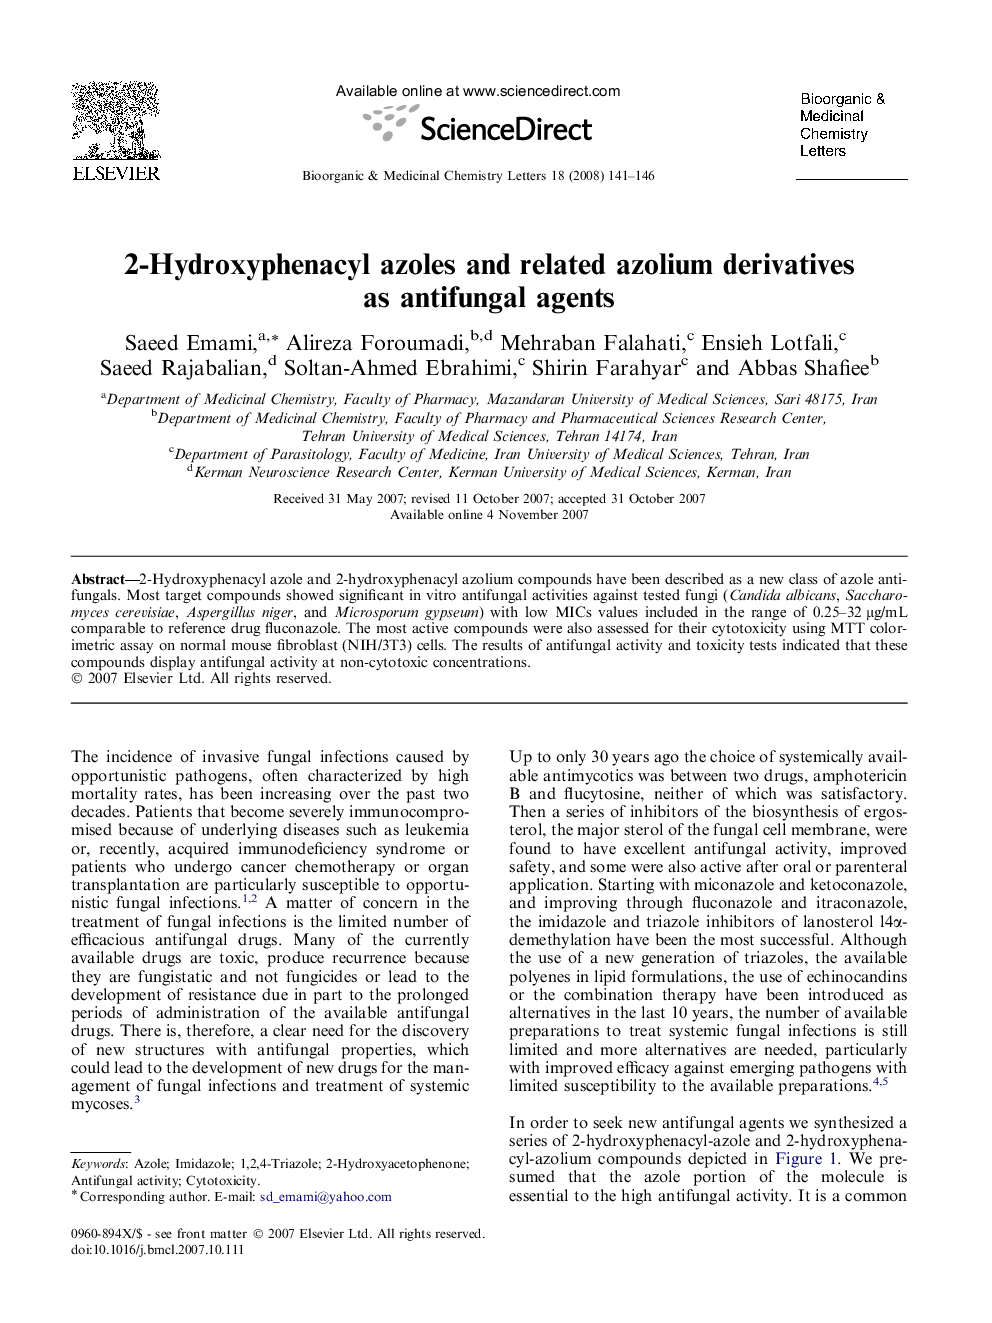 2-Hydroxyphenacyl azoles and related azolium derivatives as antifungal agents